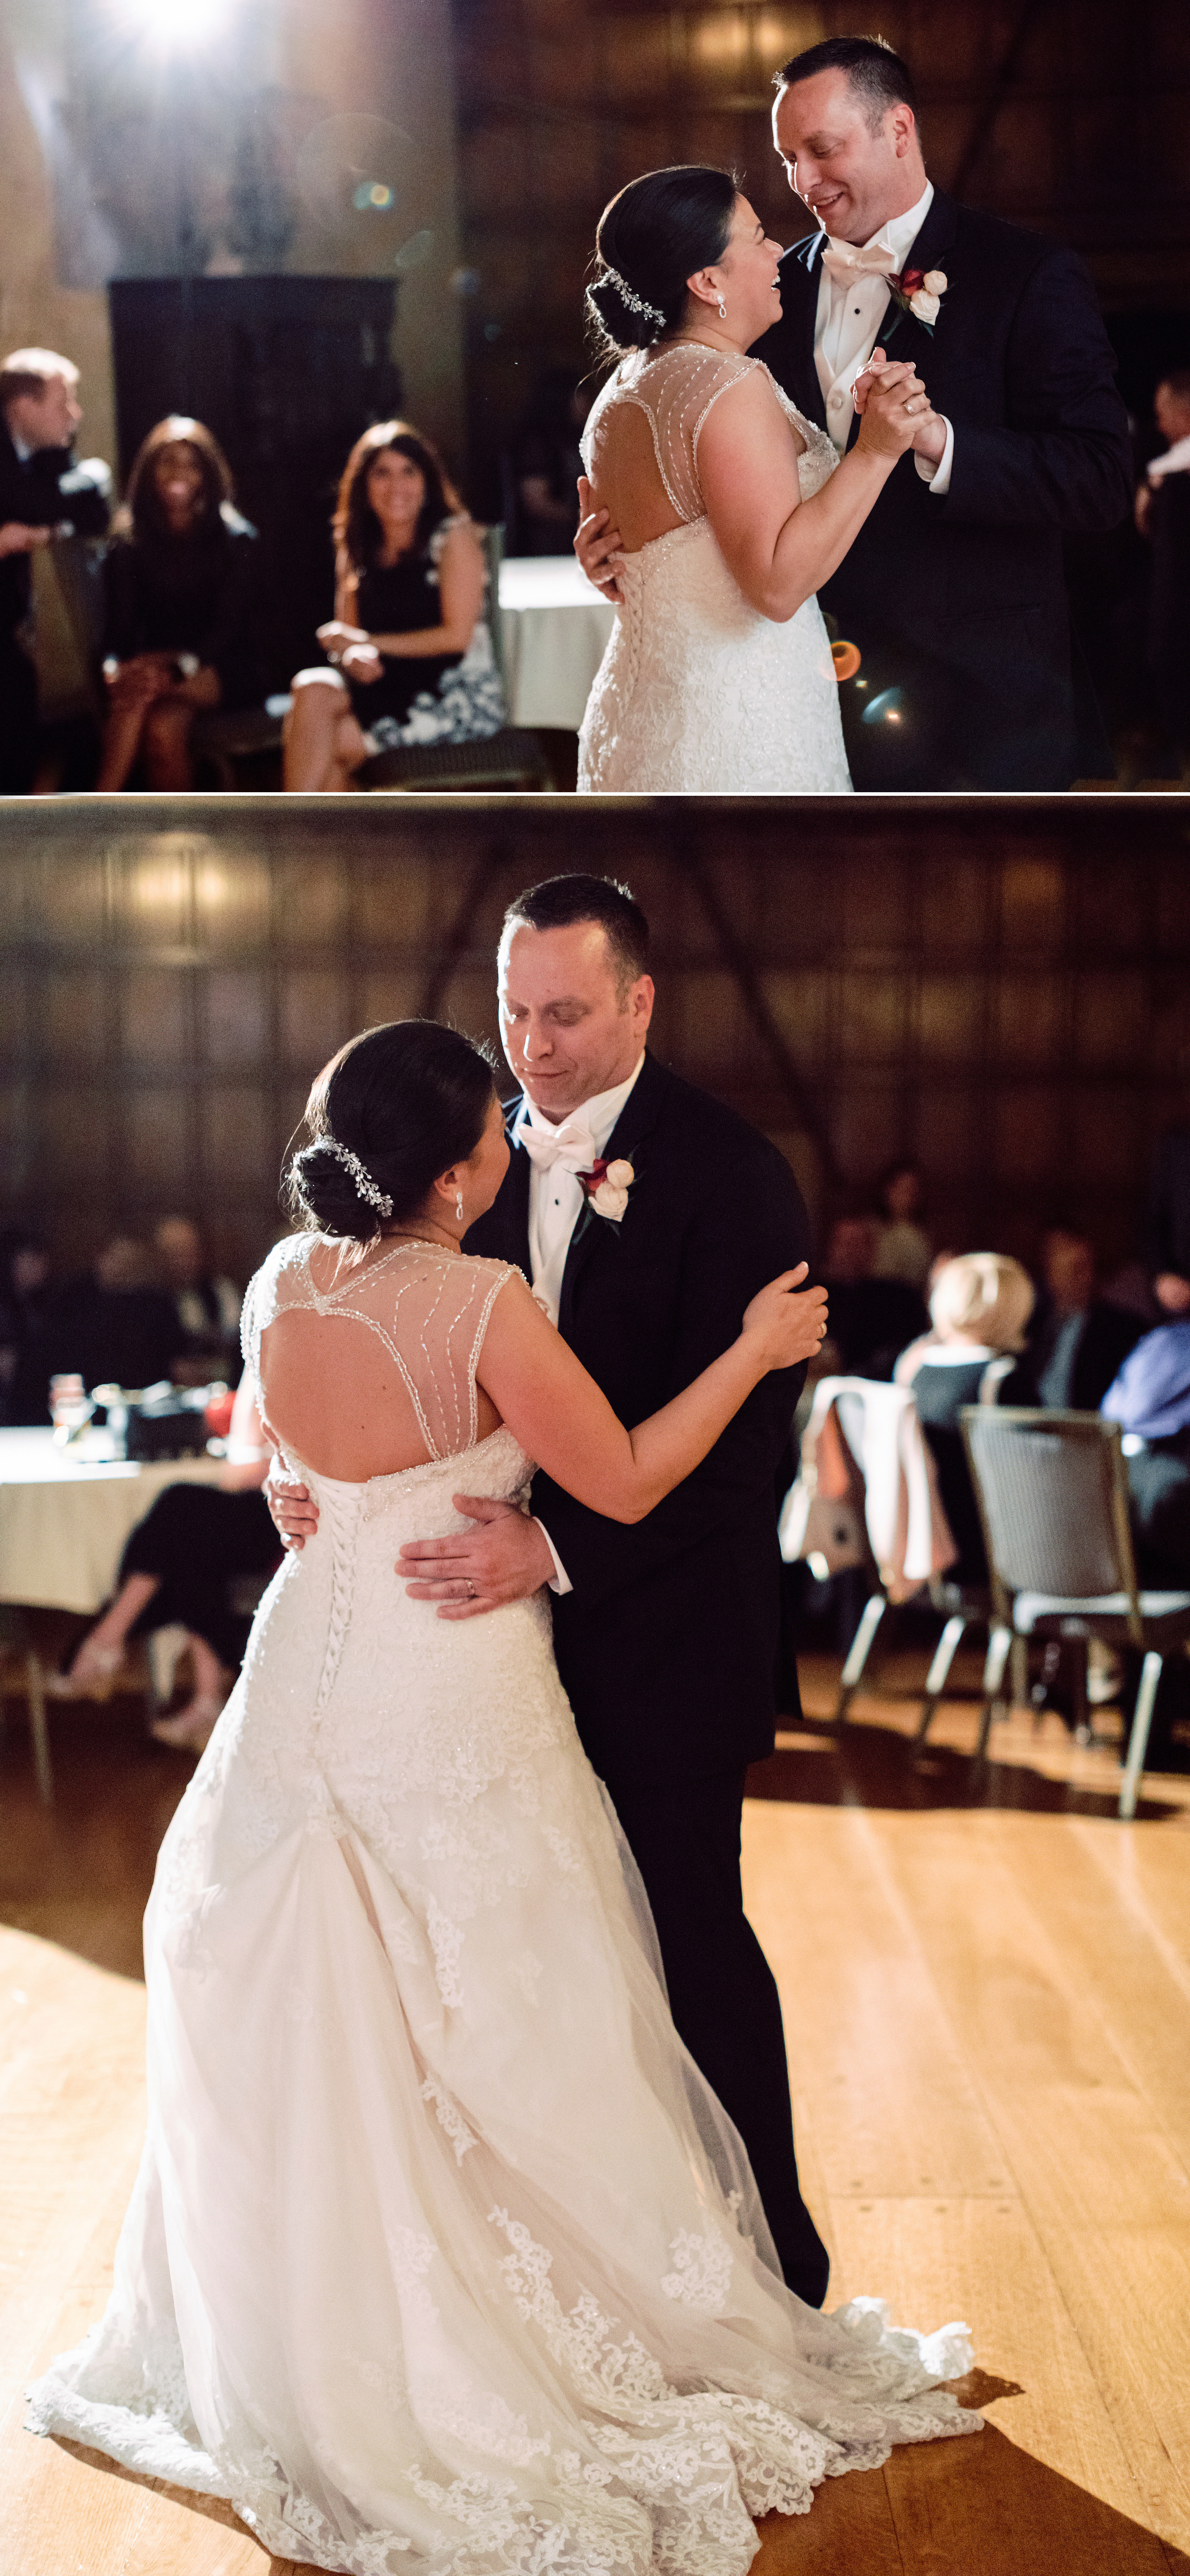 Husband and wife having their first dance